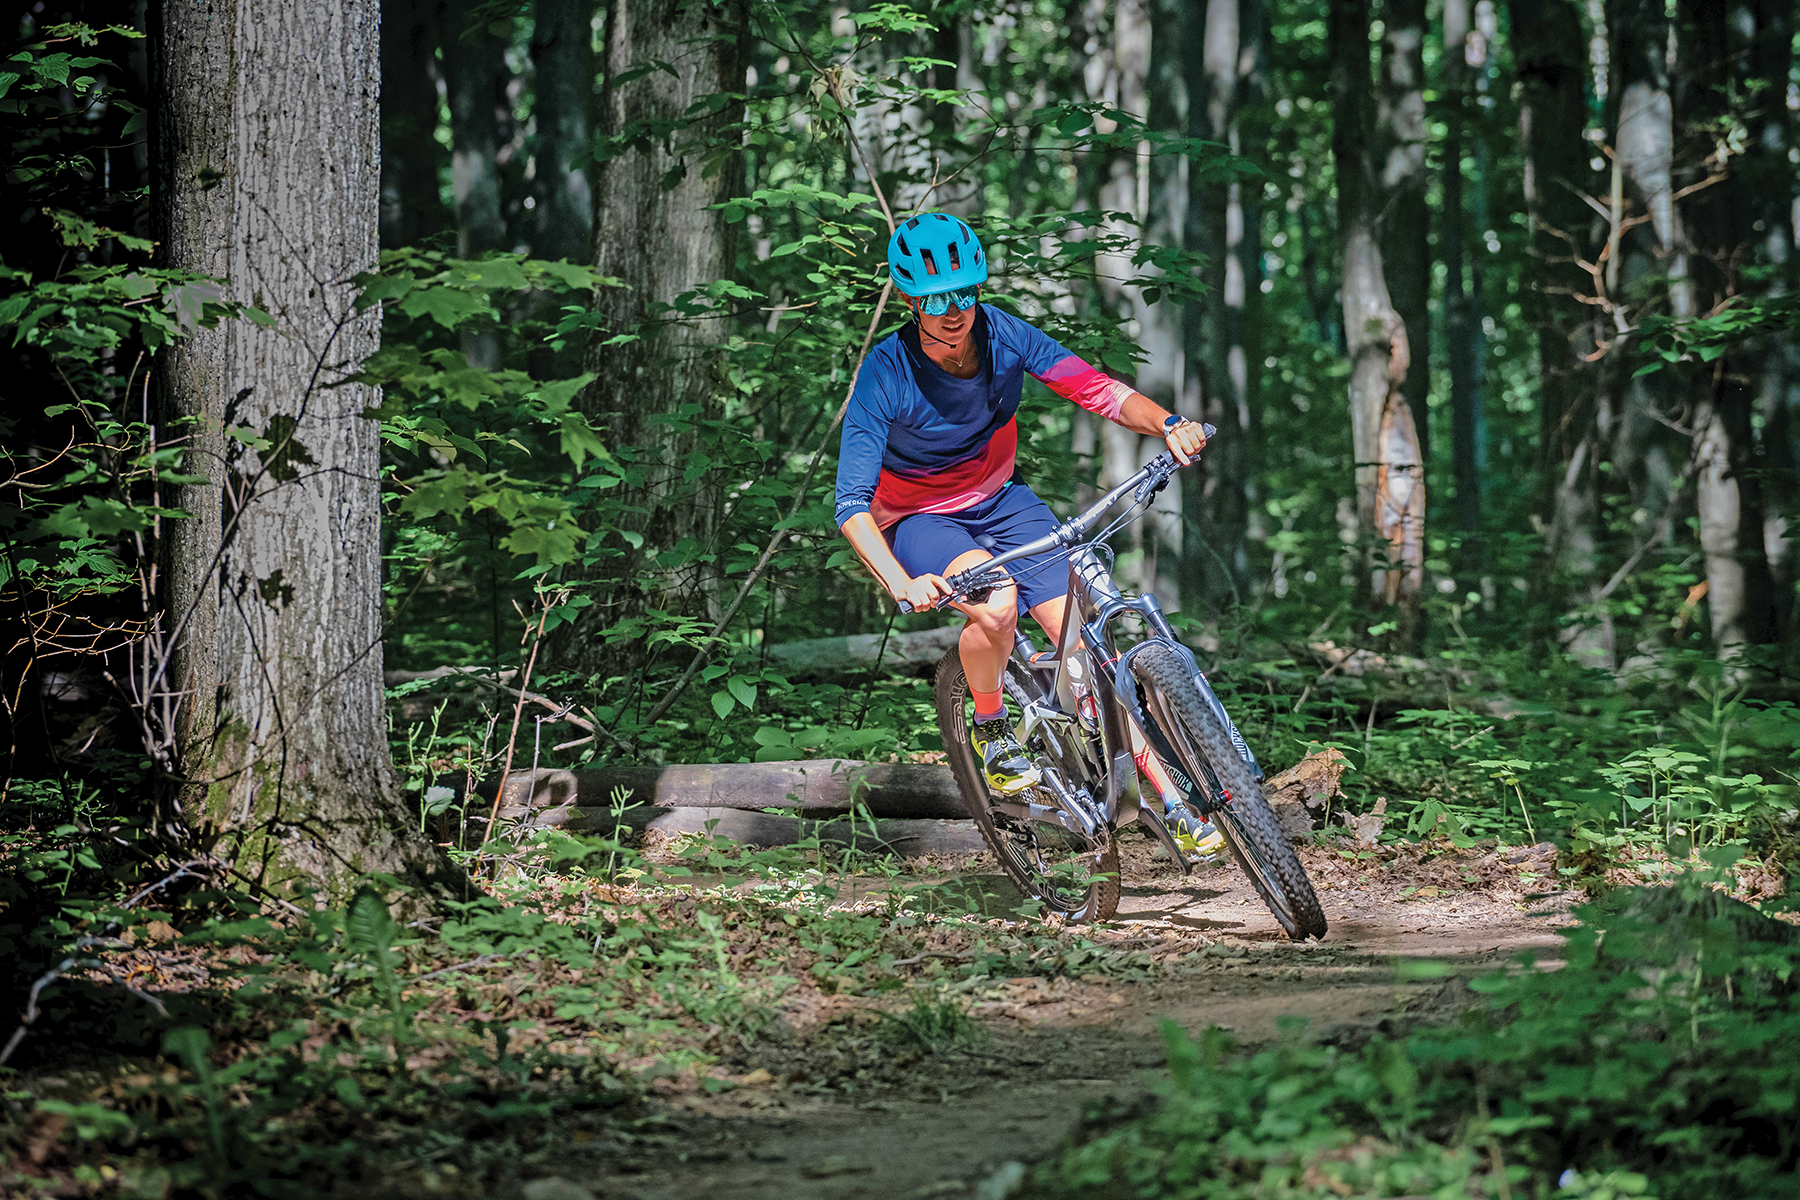 Ali Hunter, rolling around one of Three Stage’s signature flow trails. This trail system has become increasingly popular in the last three years.